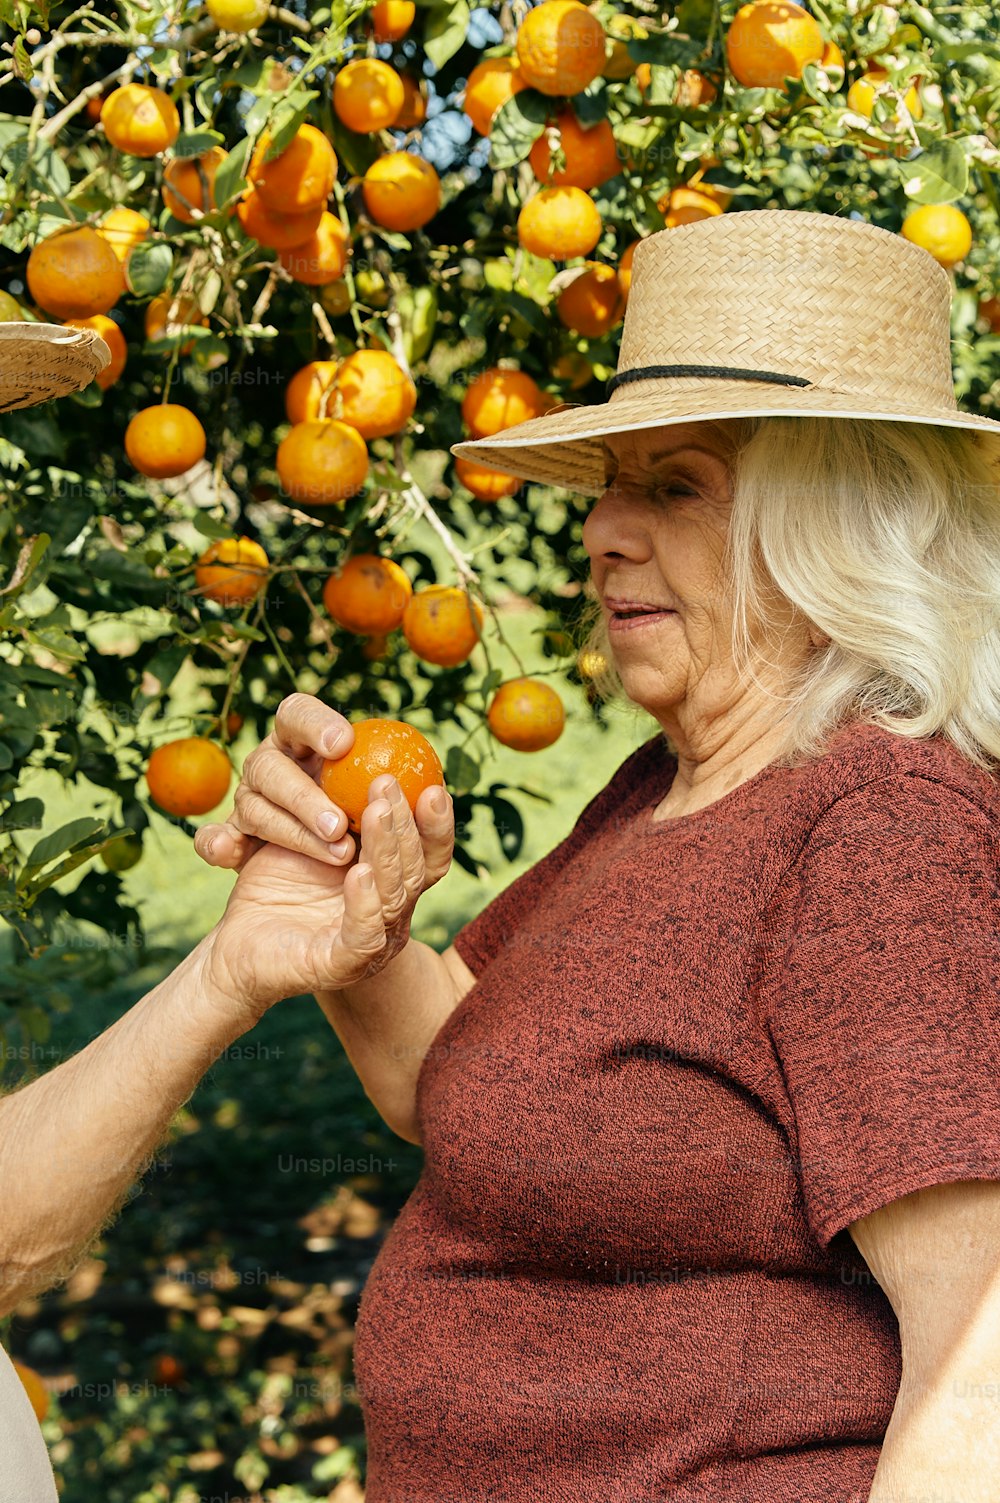 a woman in a straw hat picking oranges from a tree